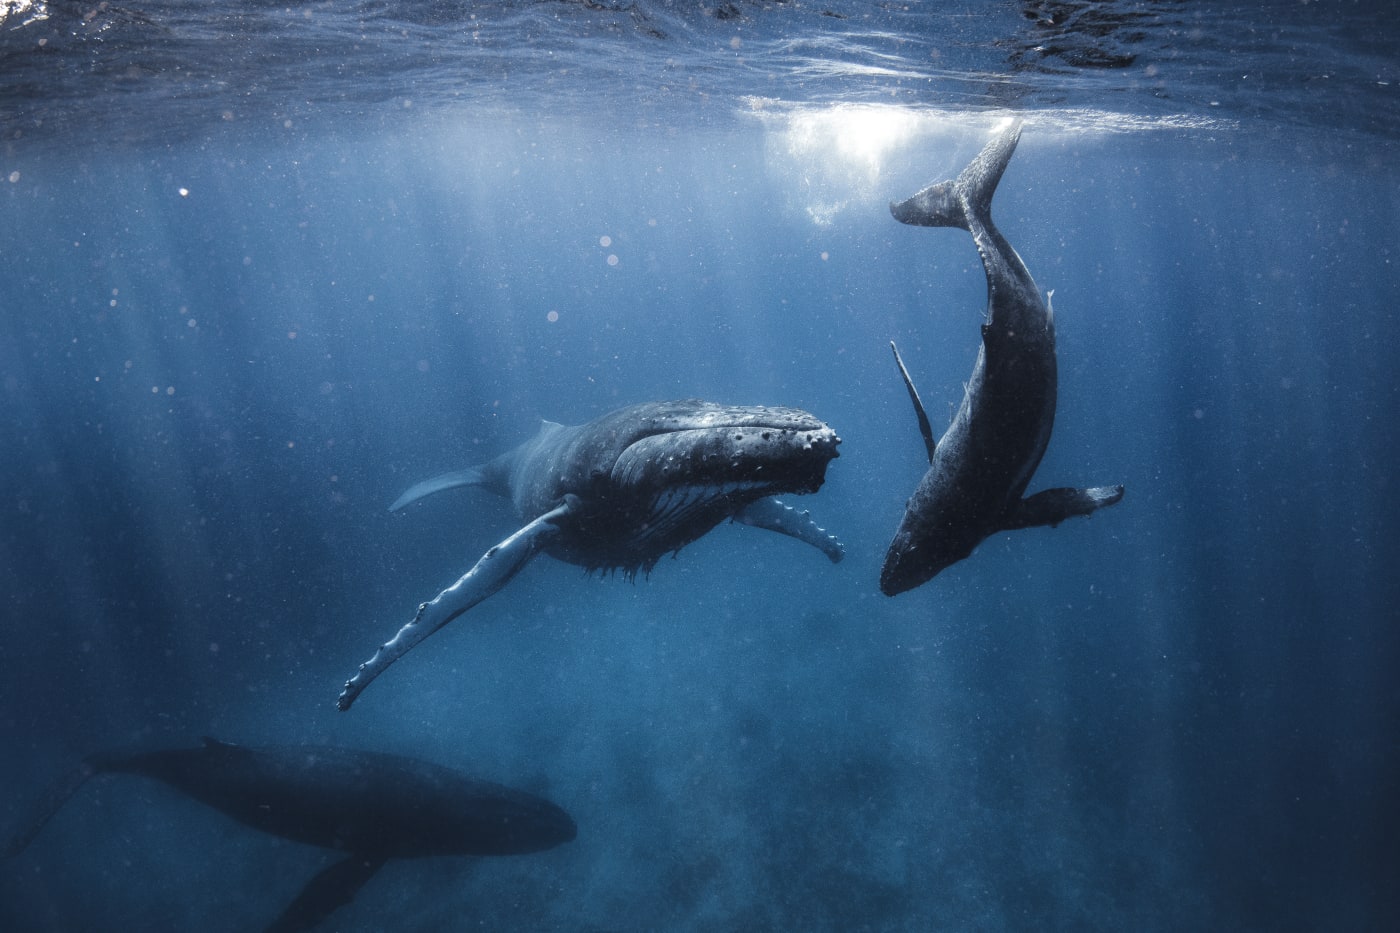 Humpback Whale family swimming through the deep blue ocean under morning light rays